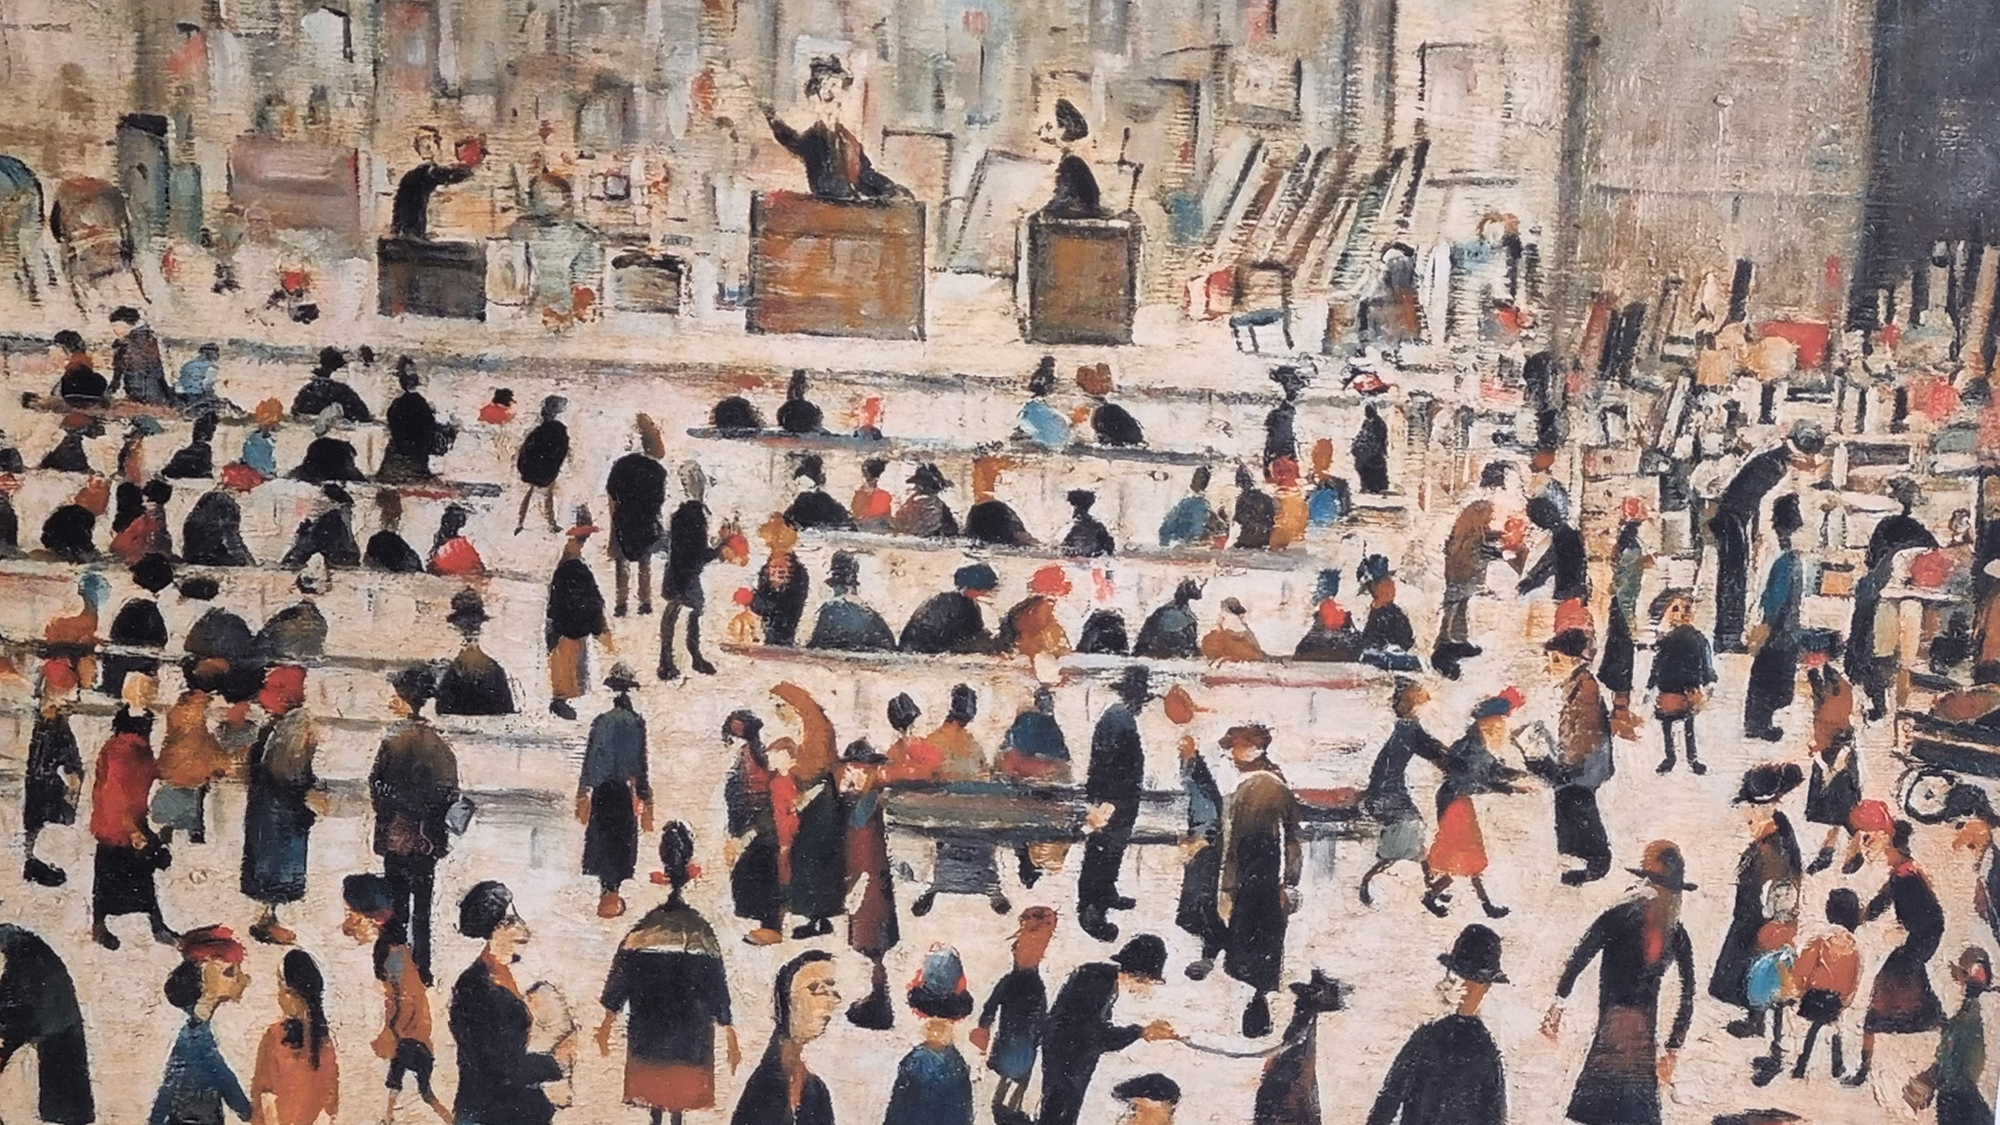 L.S. Lowry Limited Edition """"The Auction"""" - Image 5 of 9